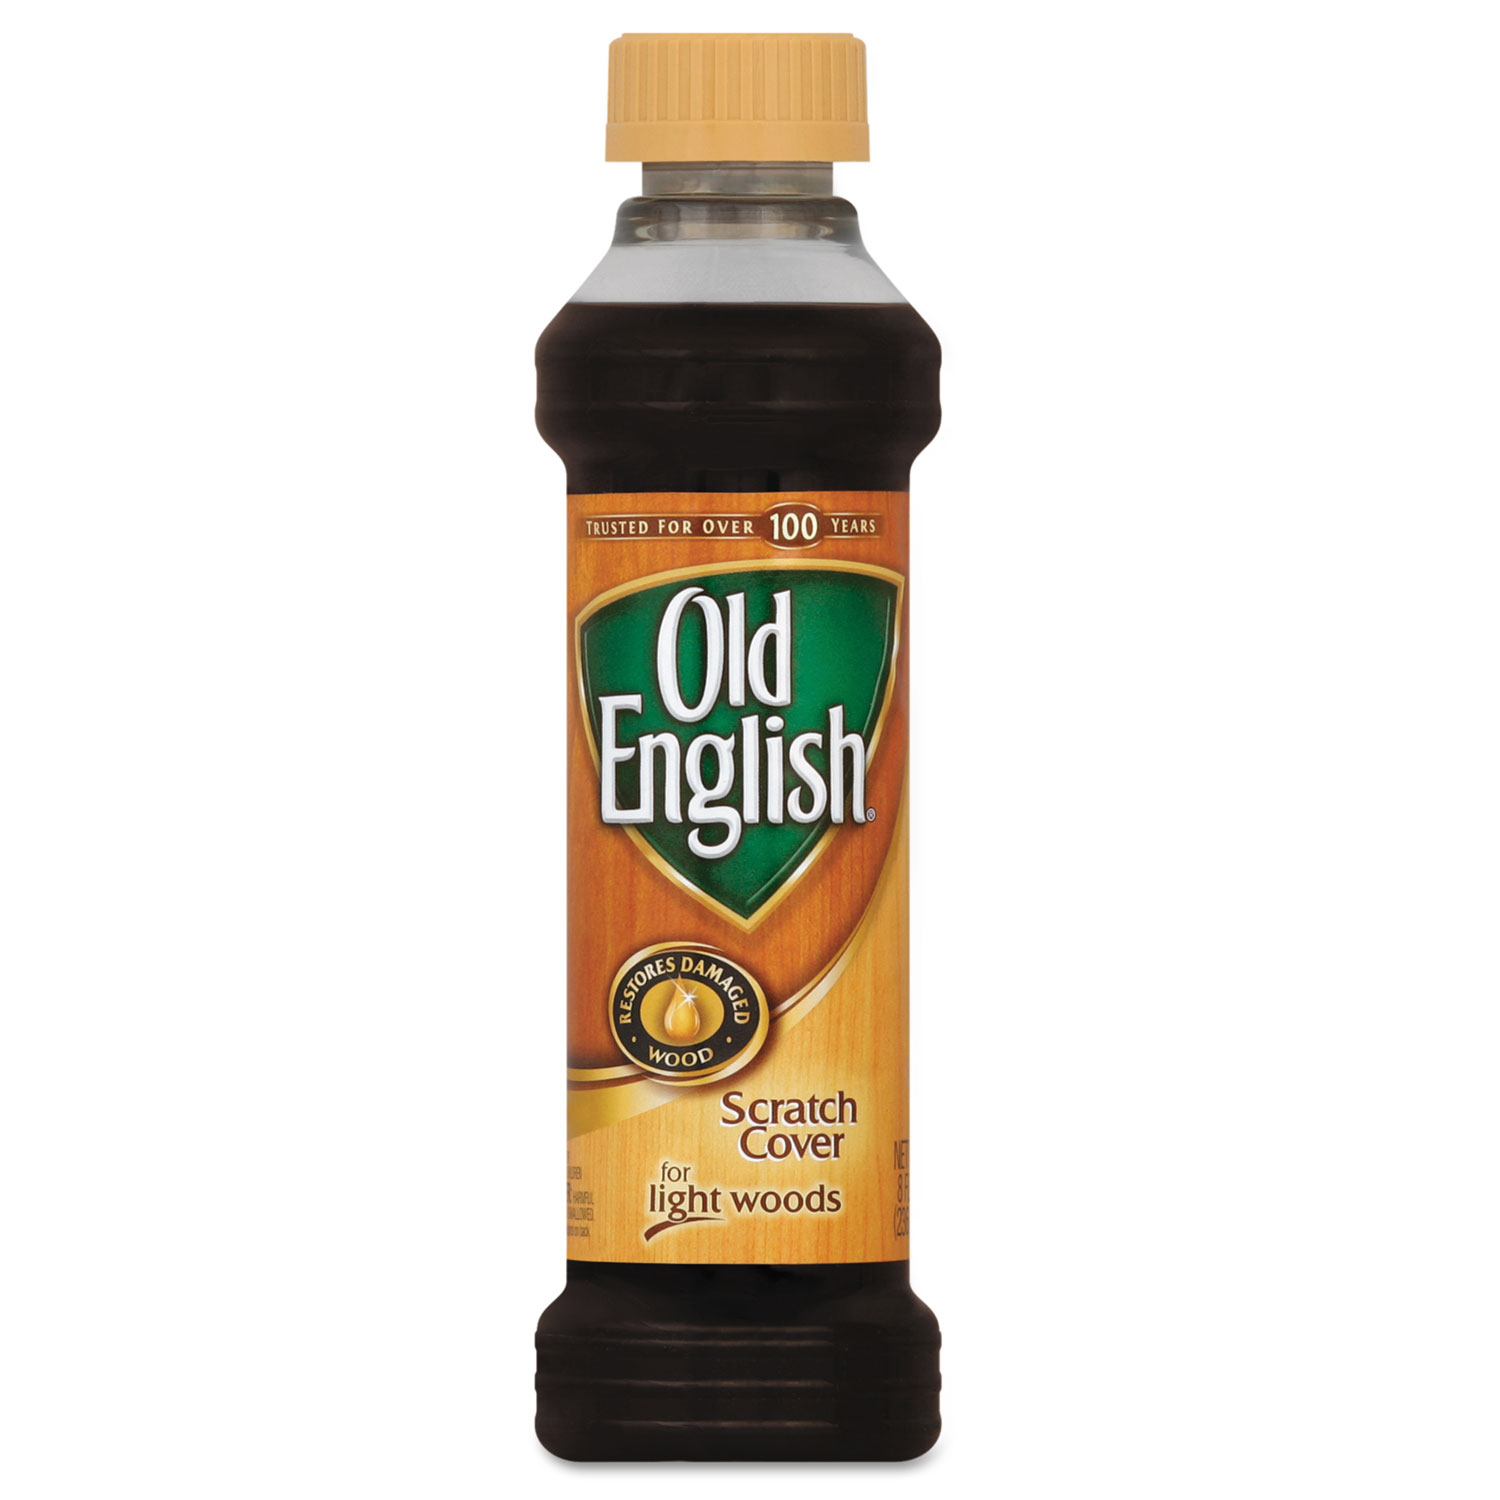  OLD ENGLISH 62338-75462 Furniture Scratch Cover, For Light Wood, 8oz Bottle (RAC75462) 